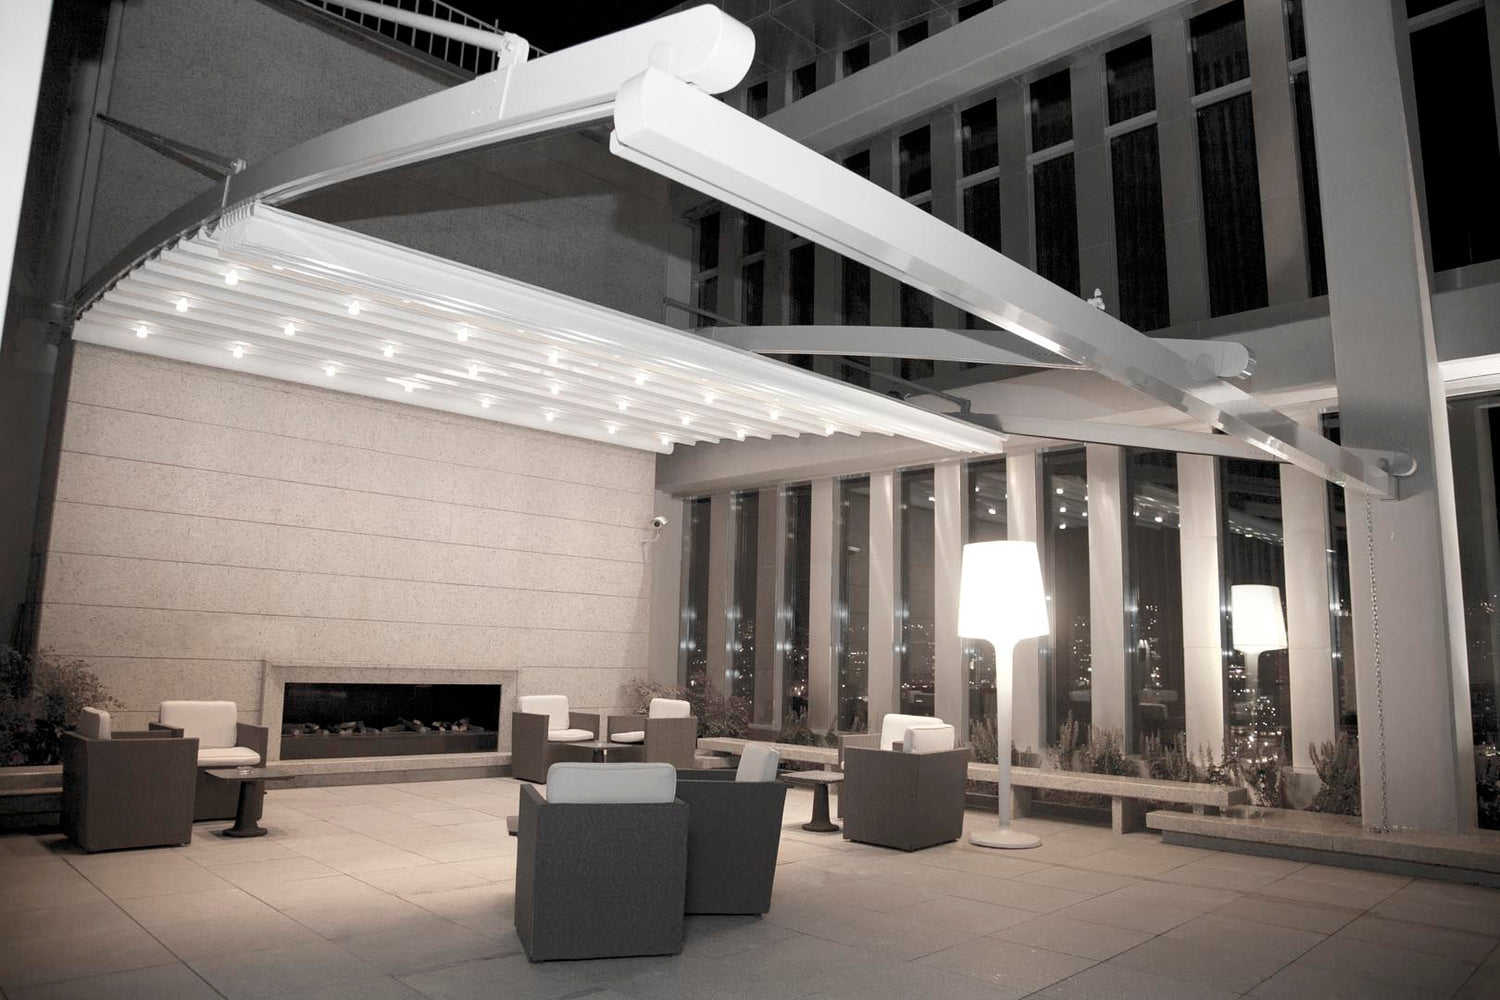 Luxury retractable pergola with illumination and modern seating area